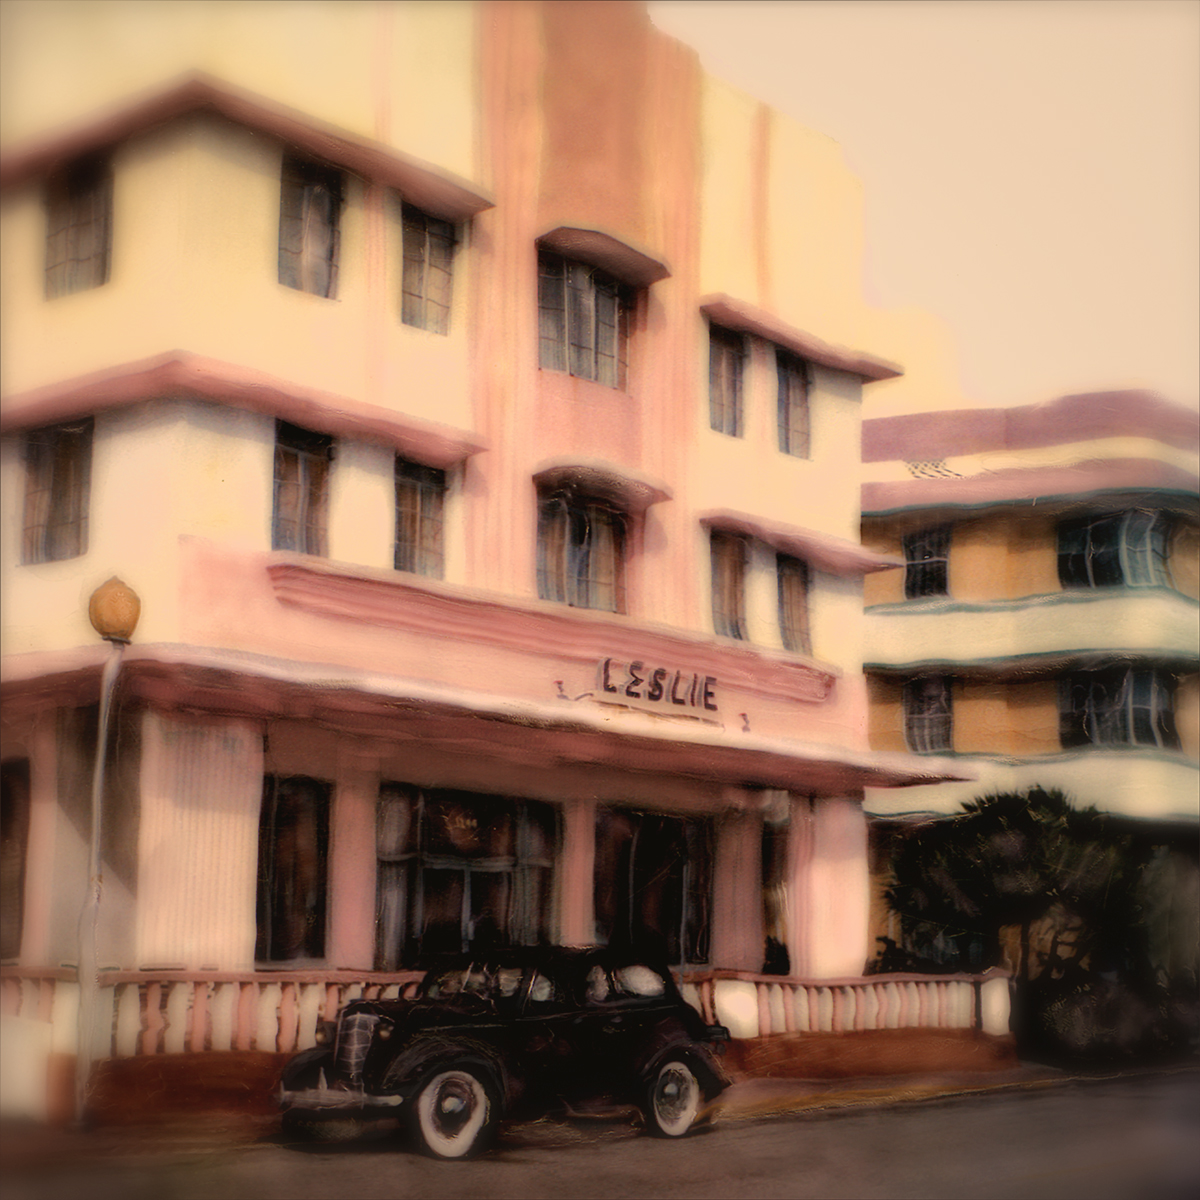 "The Leslie Hotel"<br> Art Deco Hotel with 1938 Plymouth, Miami Beach, FL